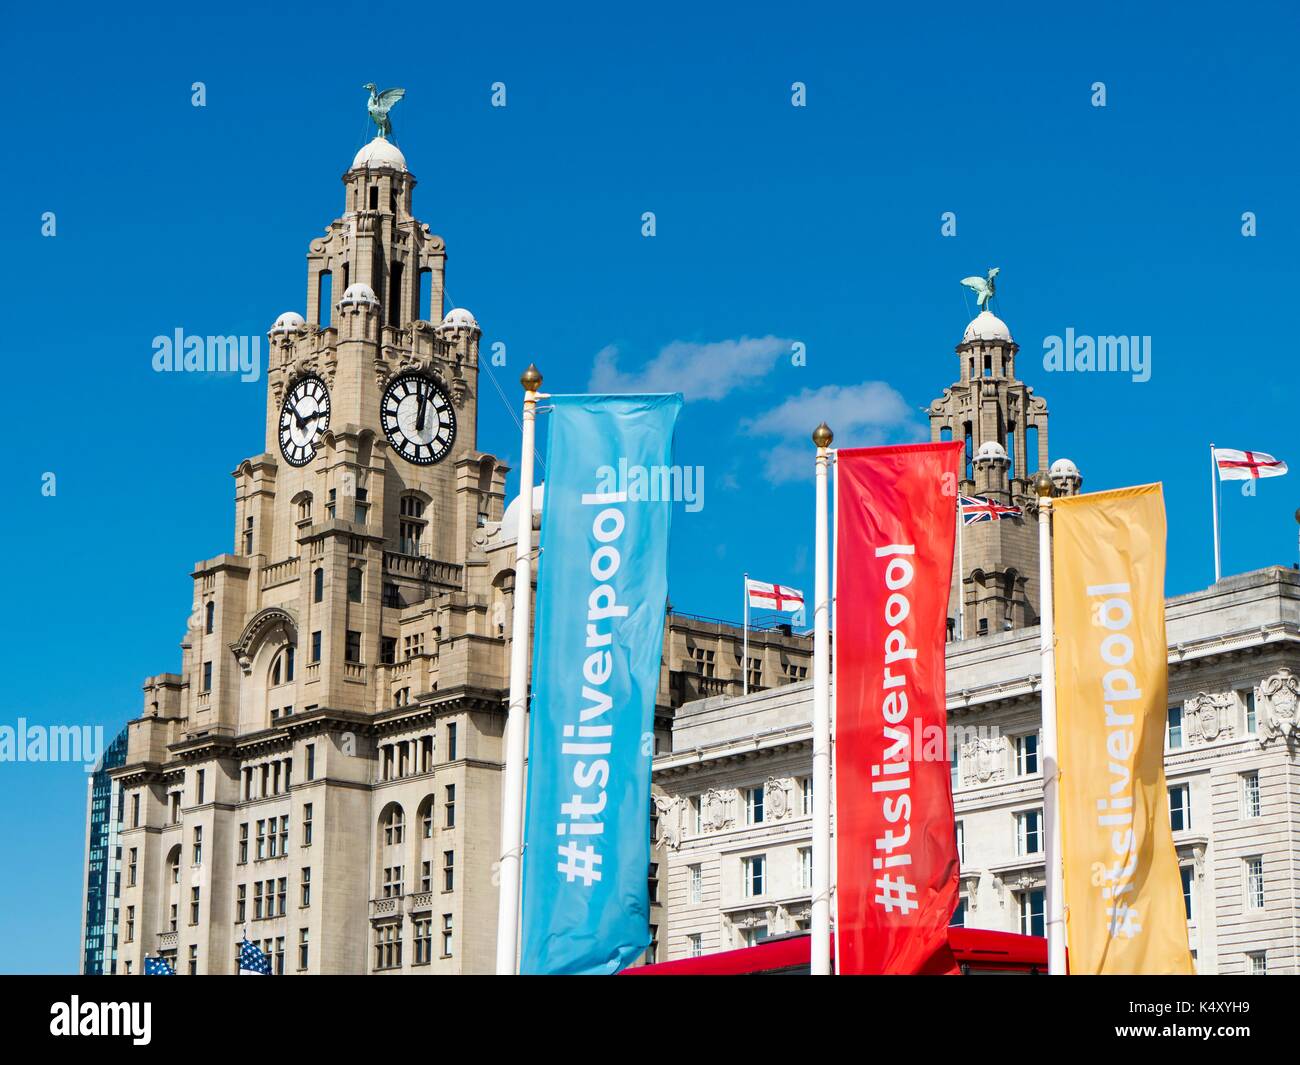 Royal Liver Building, Pier Head, Liverpool, showing Liverpool banners. Stock Photo